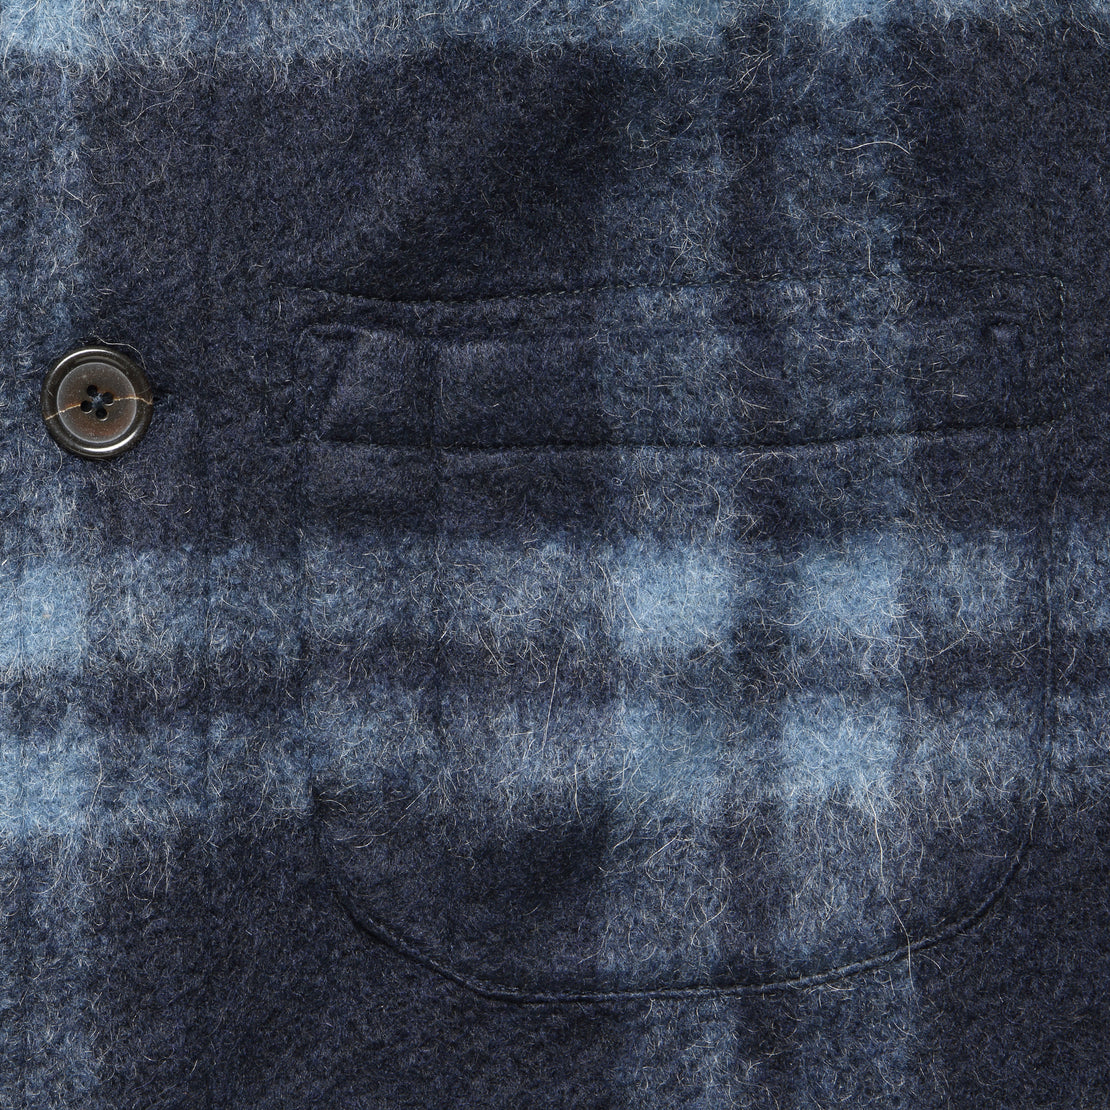 Soft Wool Field Jacket - Navy Plaid - Universal Works - STAG Provisions - Outerwear - Coat / Jacket